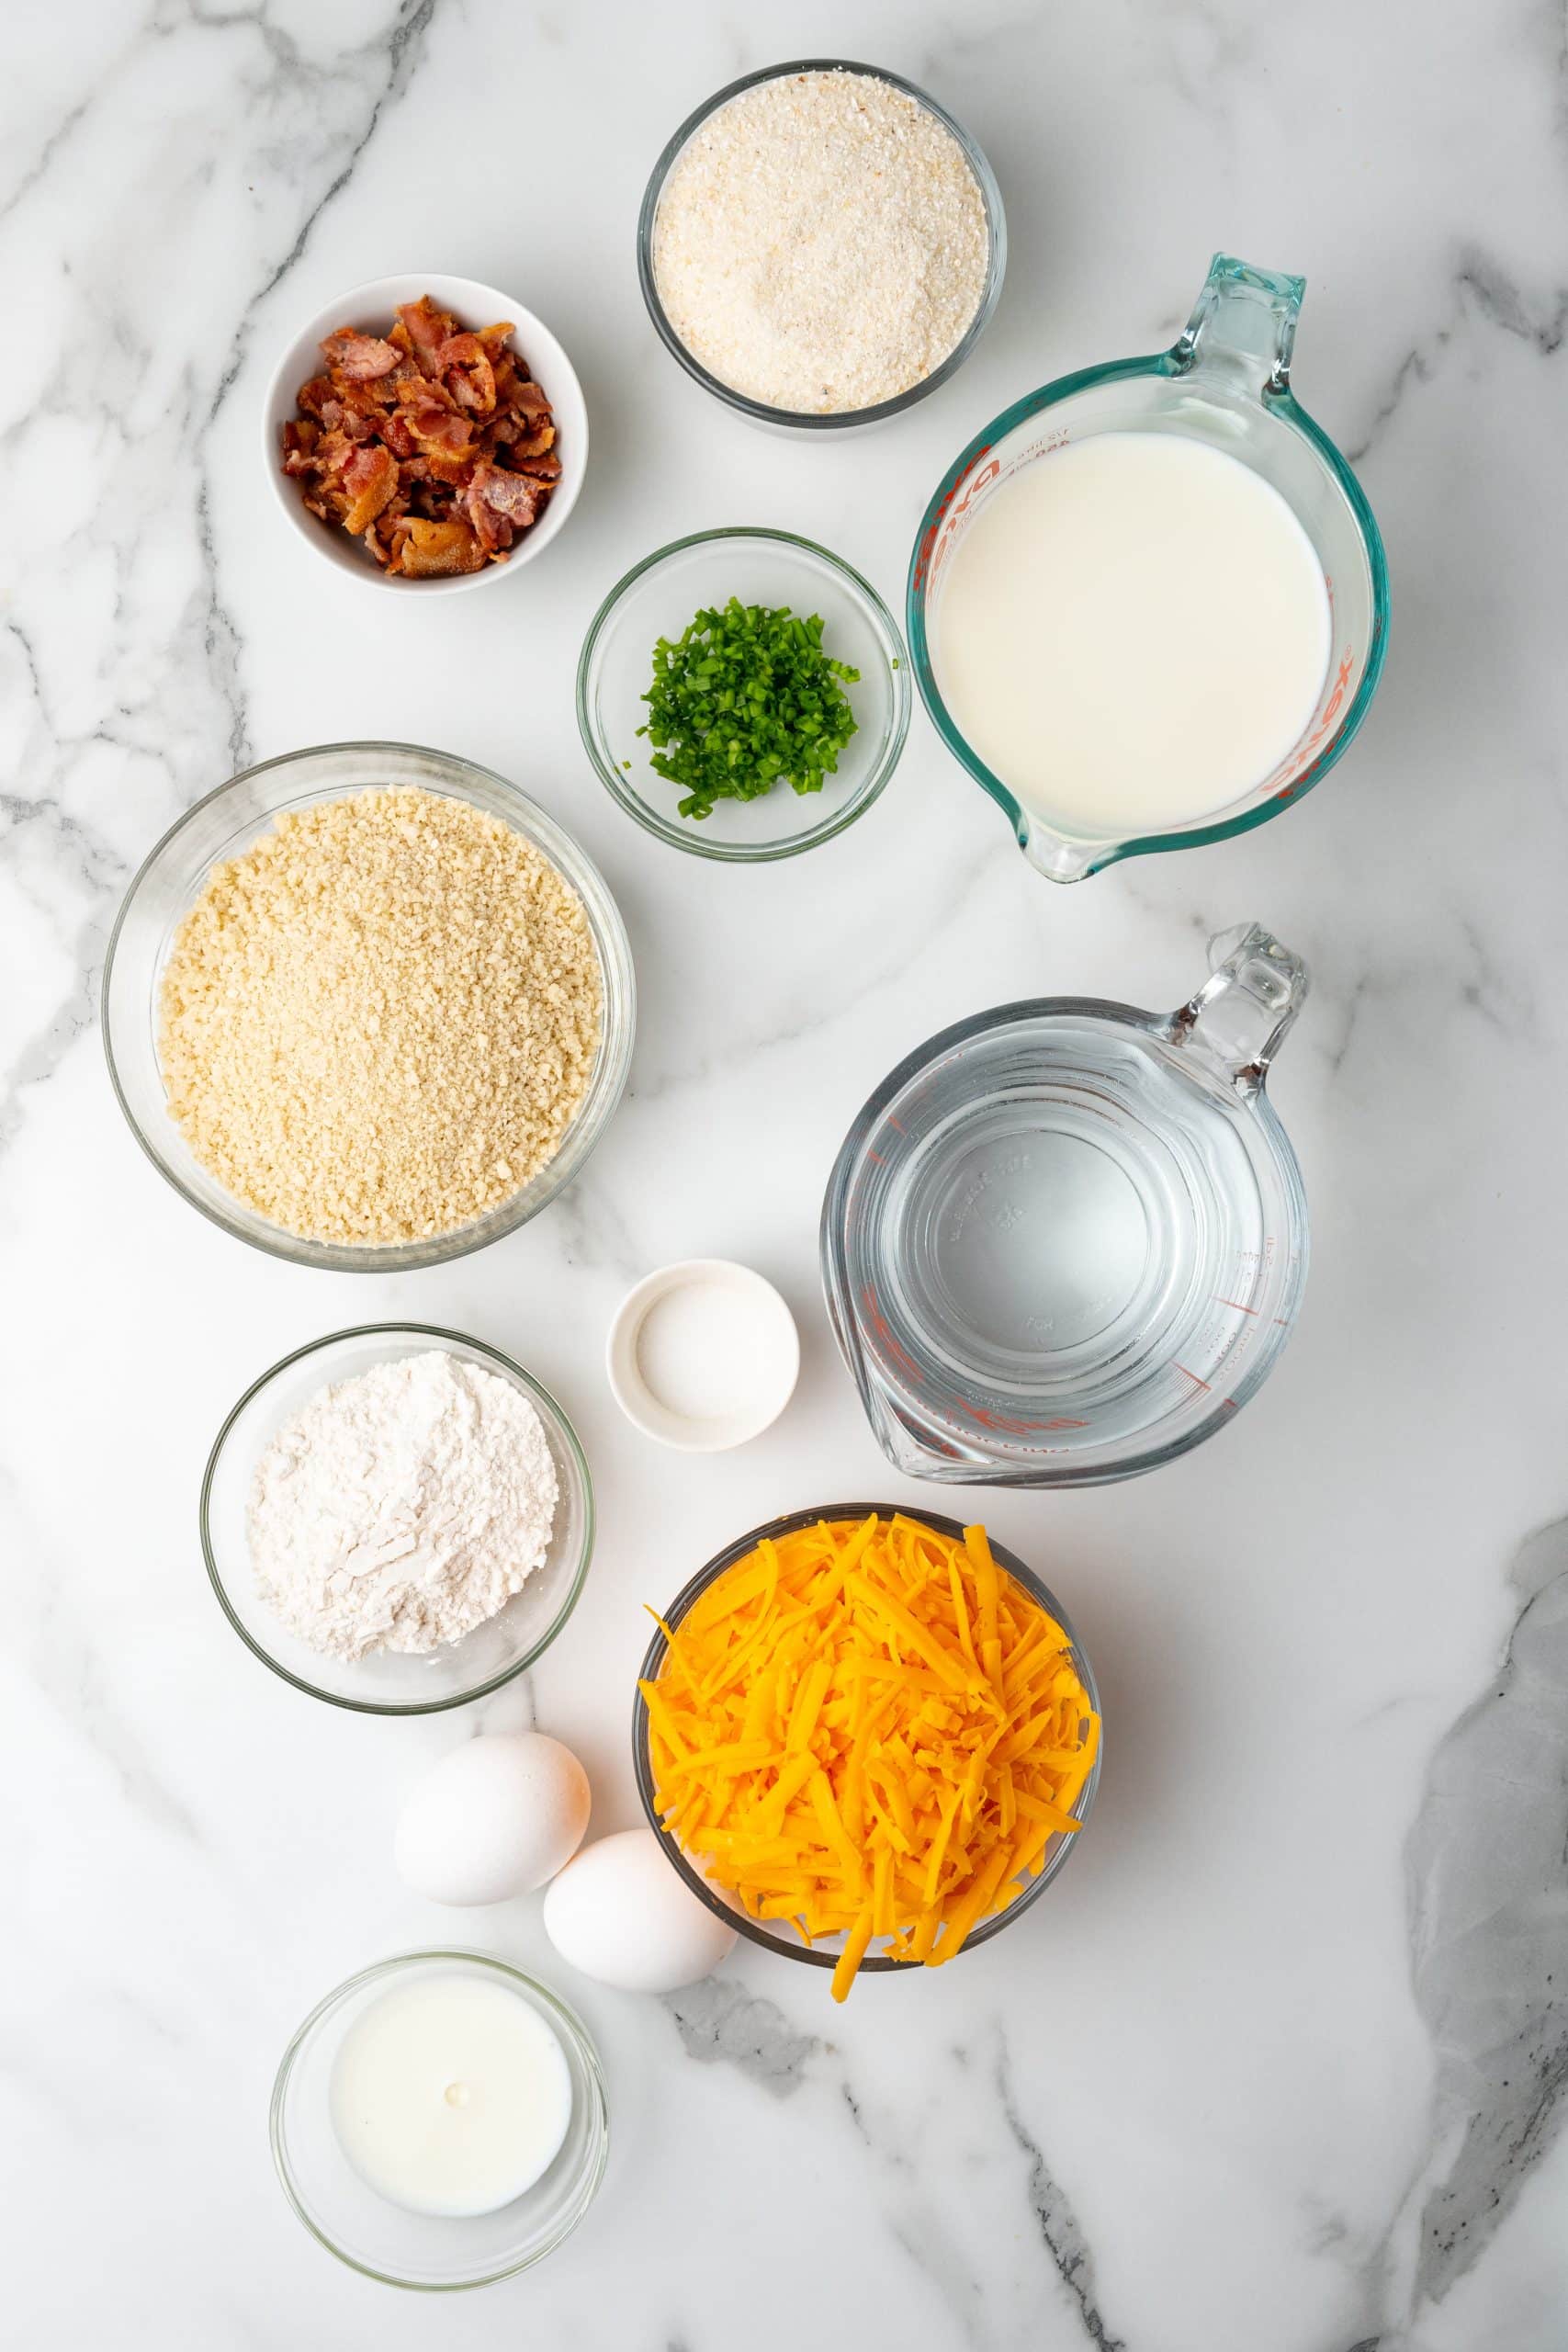 an overhead image showing the measured ingredients needed to make a batch of leftover grits fritters